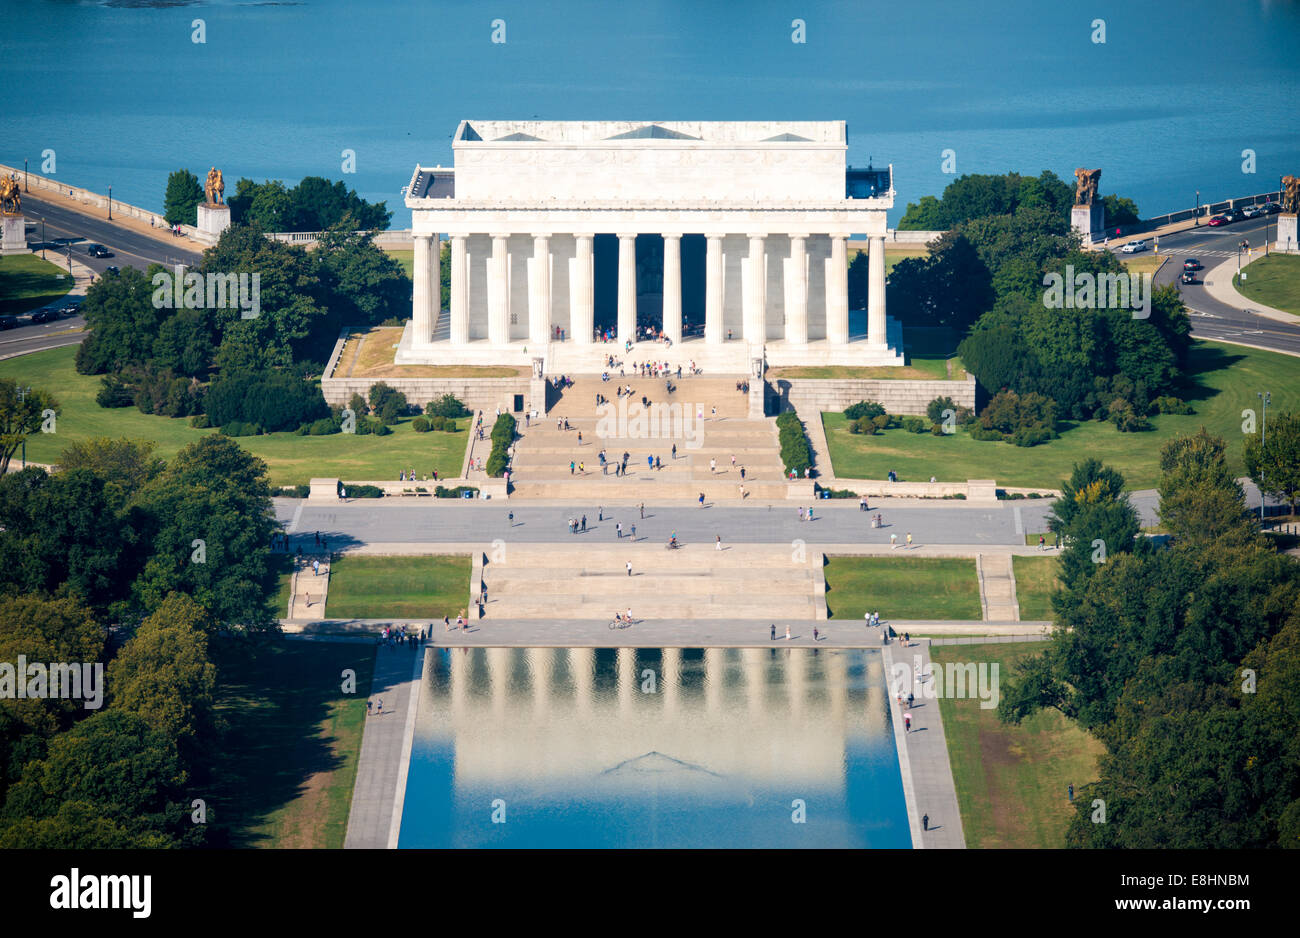 WASHINGTON DC, USA - An elevated view of the Lincoln Memorial and part of the Reflecting Pool, seen from the top of the Washington Monument. The Washington Monument stands at over 555 feet (169 metres) at the center of the National Mall in Washington DC. It was completed in 1884 and underwent extensive renovations in 2012-13 after an earthquake damaged some of the structure. Stock Photo